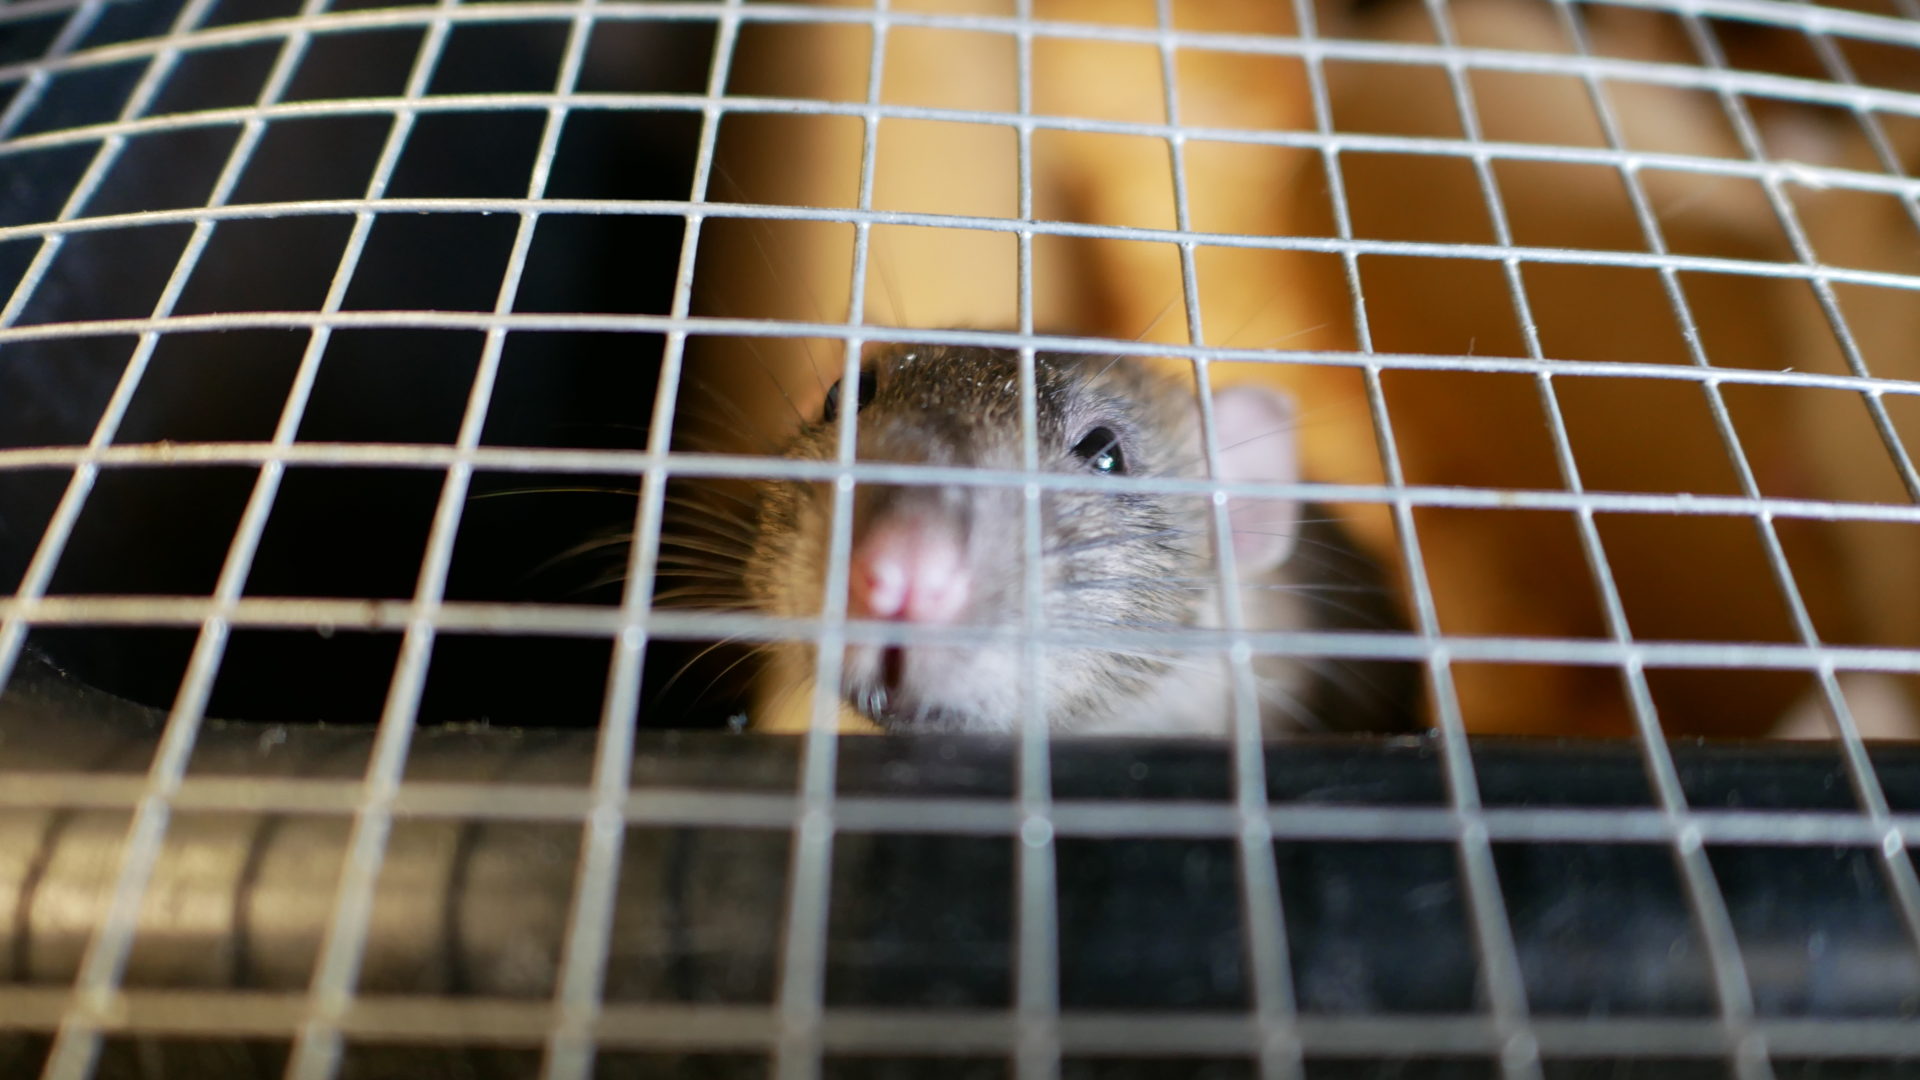 A rat bred for food at the spotted owl breeding facility. Photo: Carol Linnitt / The Narwhal